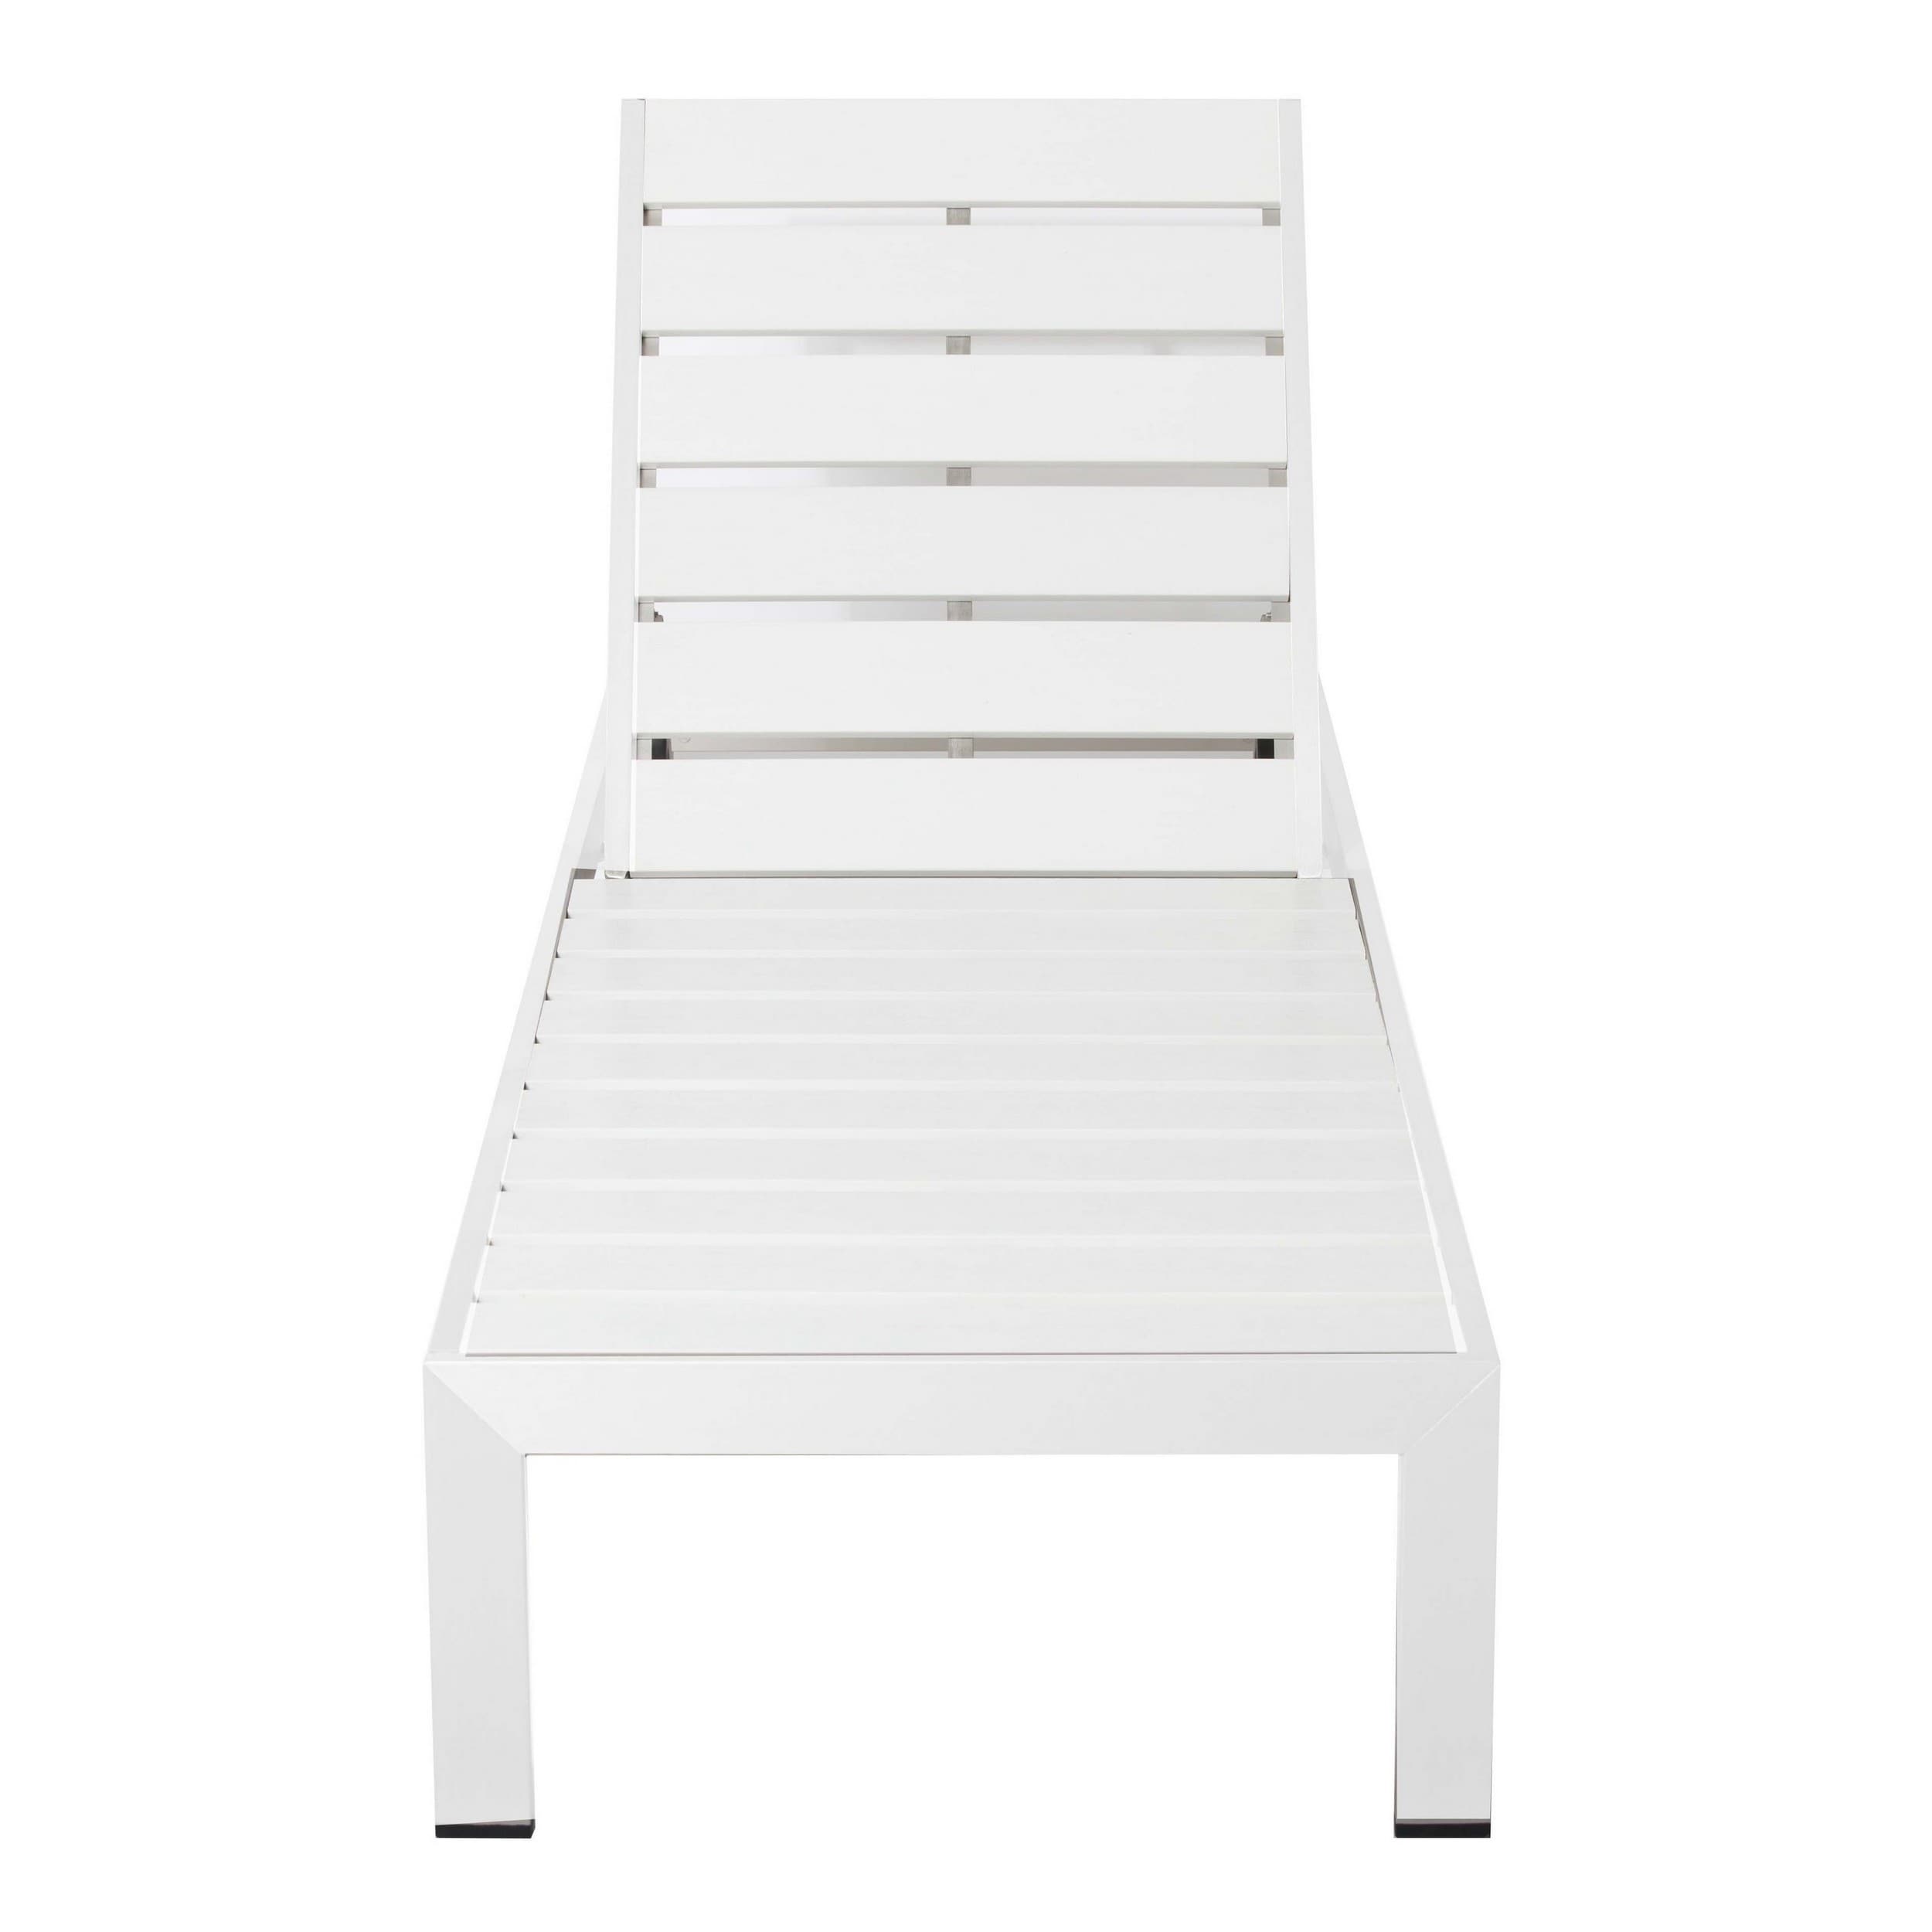 Josh 76 Inch Outdoor Chaise Lounger  White Aluminum Frame  Adjustable